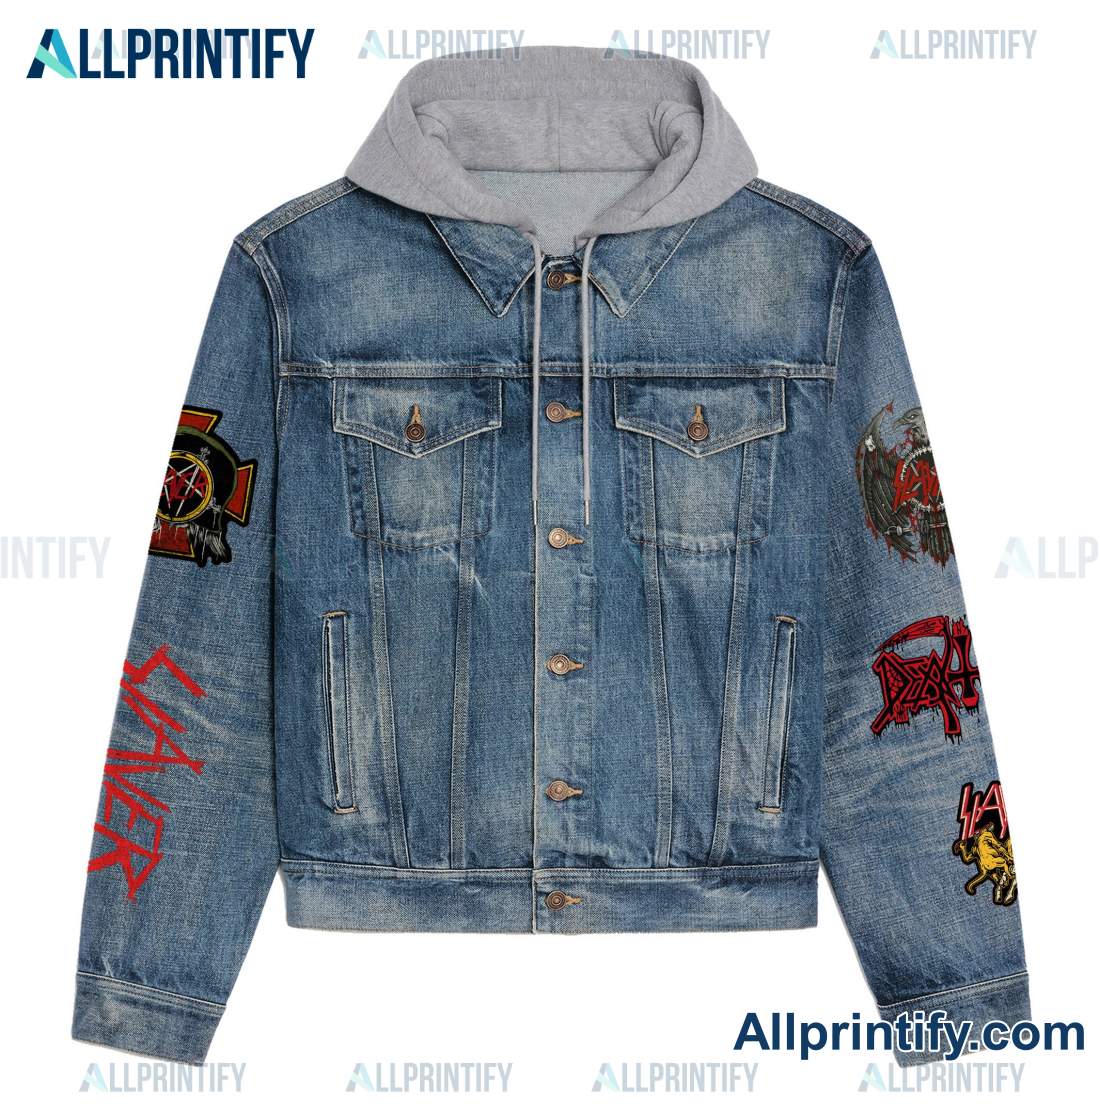 Slayer Only The Strong Will Prosper Hooded Denim Jacket a